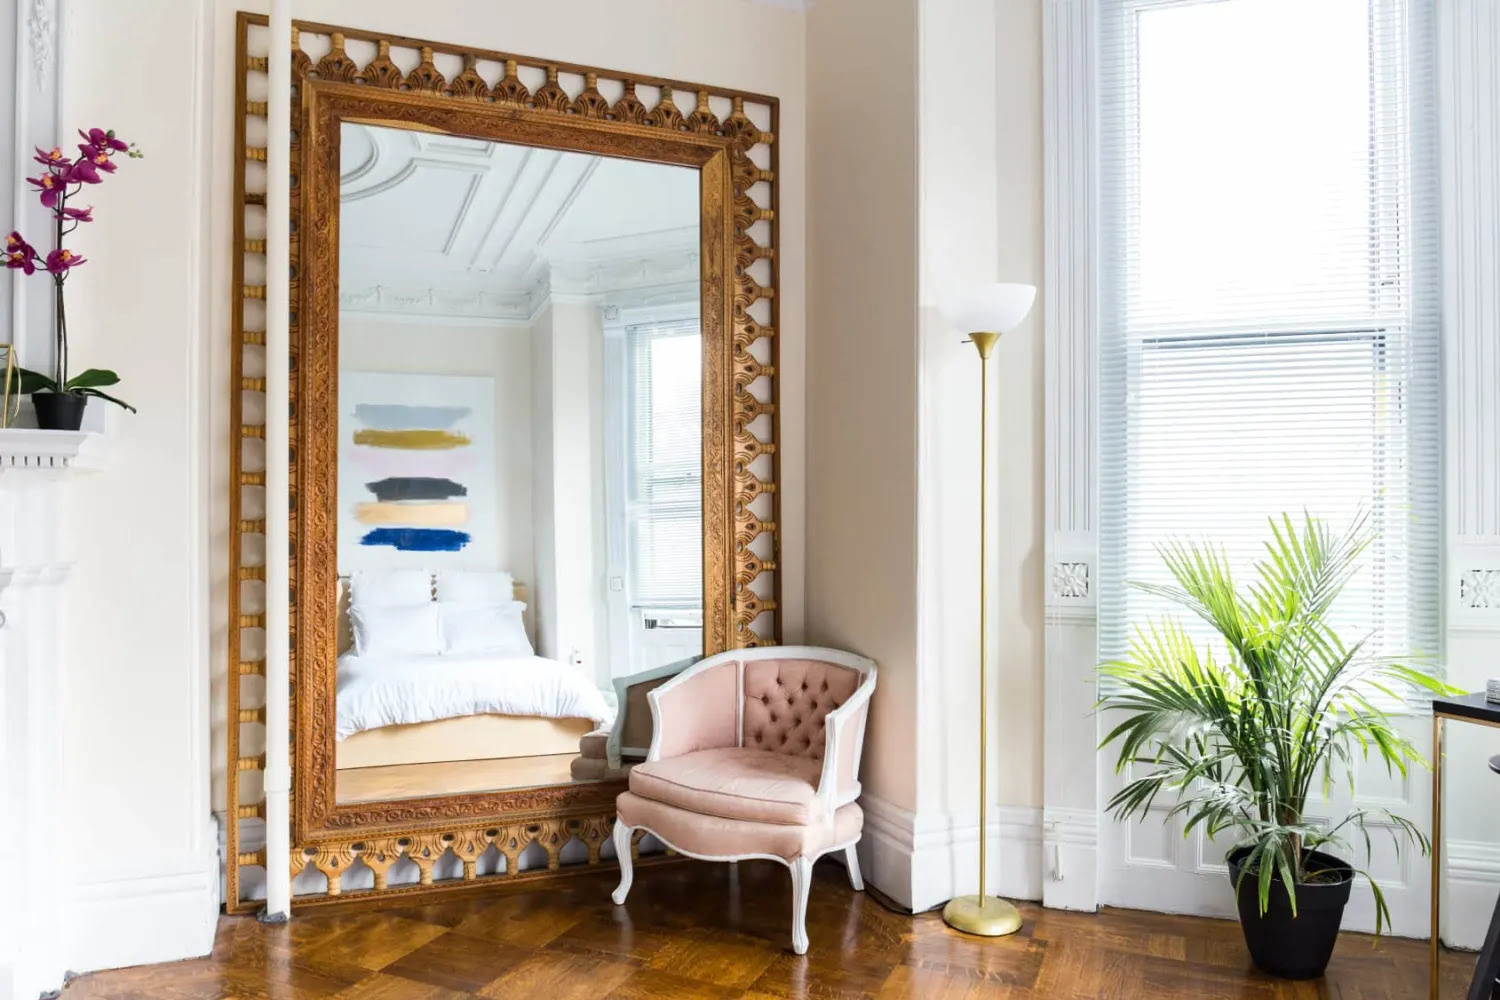 5 Ways To Stage Your Home With Mirrors – So It Looks Bigger